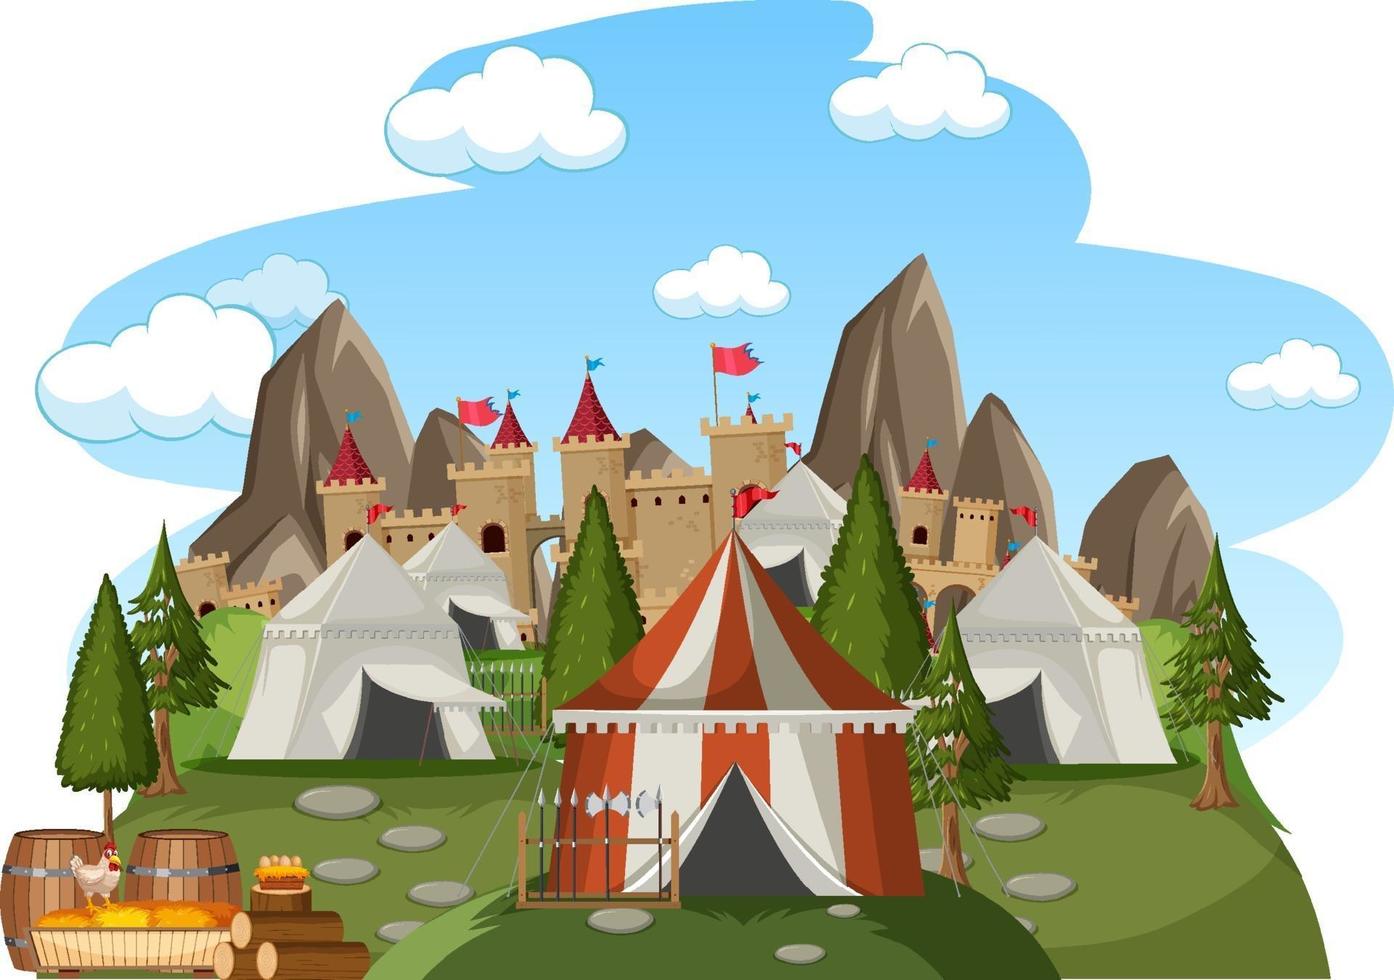 Military medieval camp on white background vector